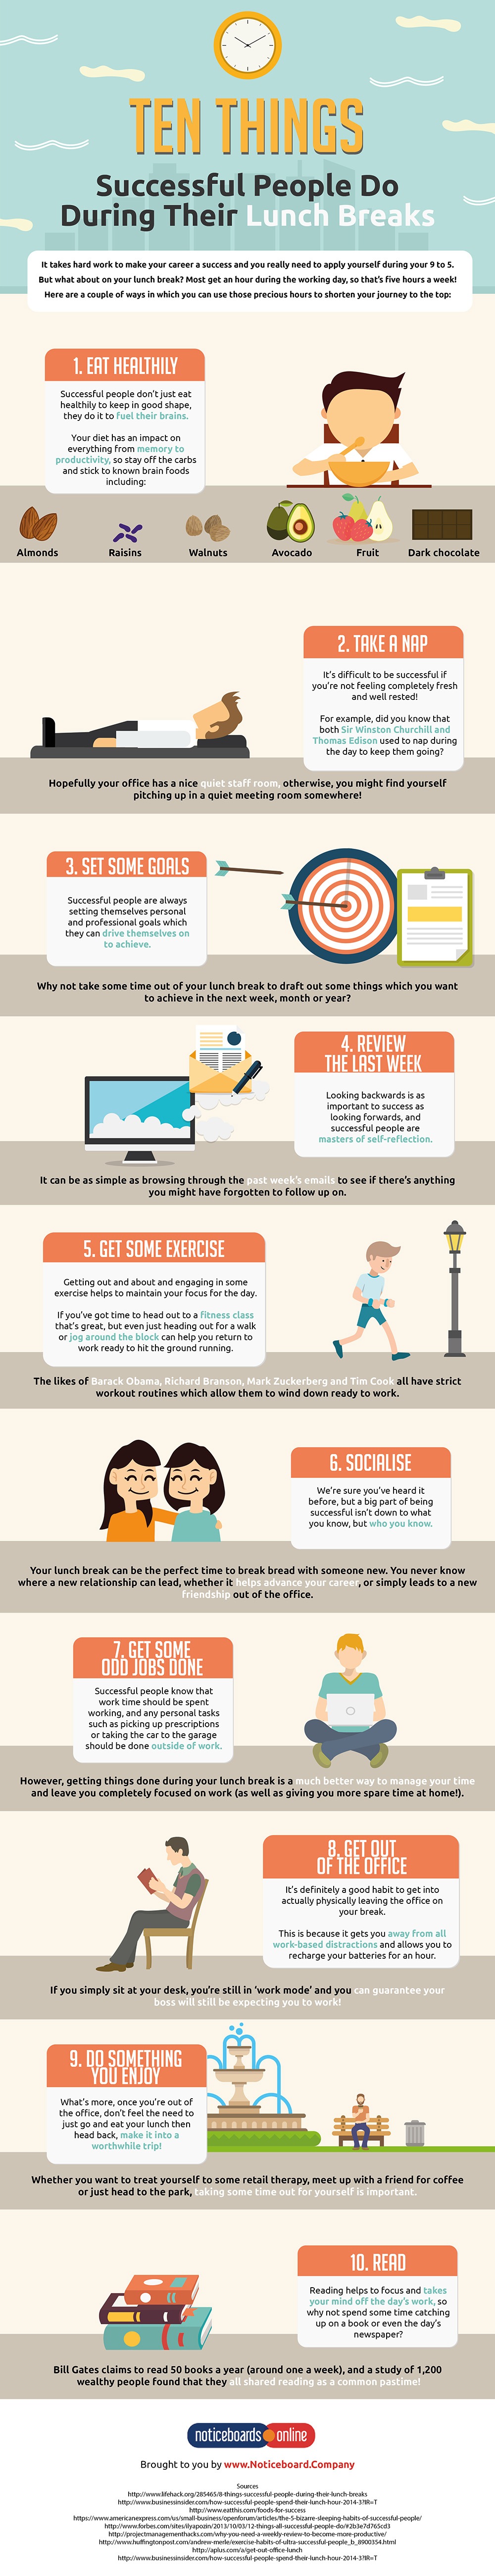 10 Things Successful People Do During Their Lunch Break [Infographic]